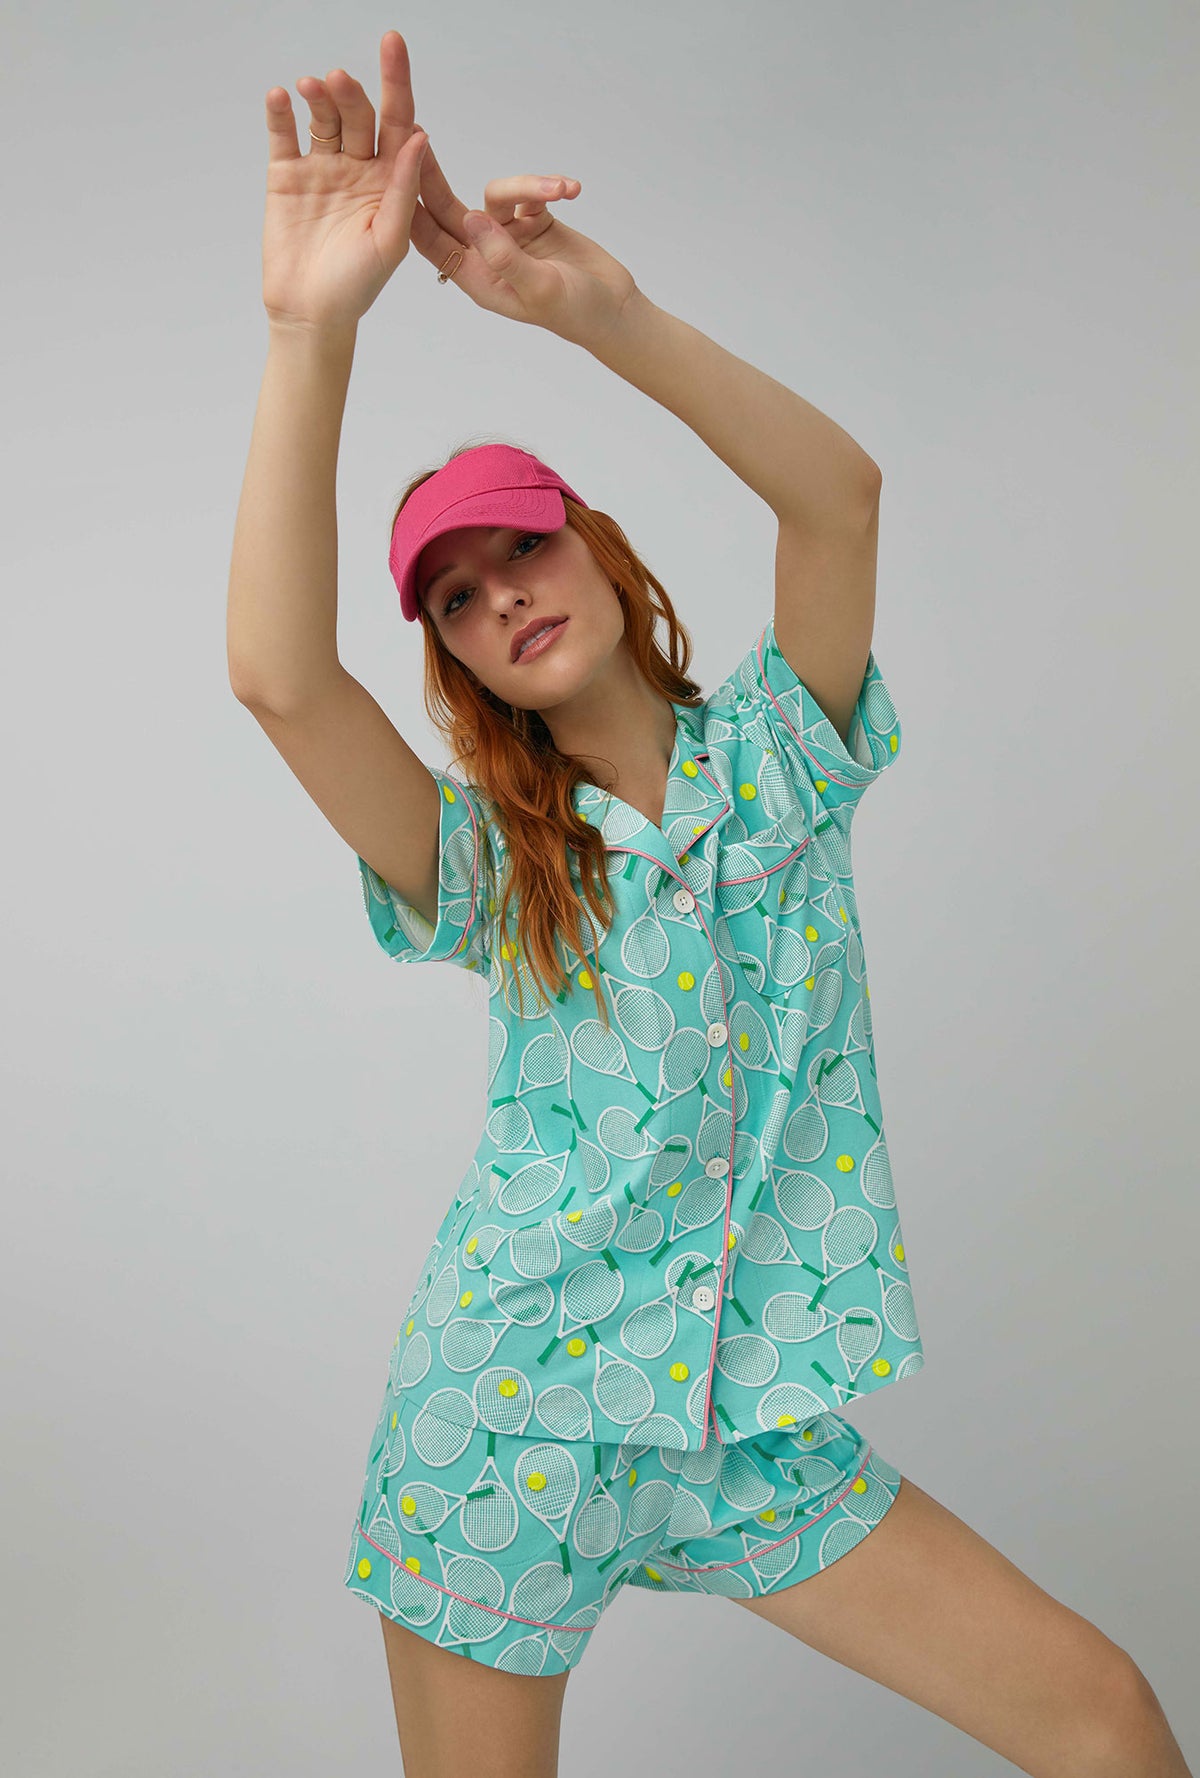 A lady wearing green Short Sleeve Classic Shorty Stretch Jersey PJ Set with Tennis Club print